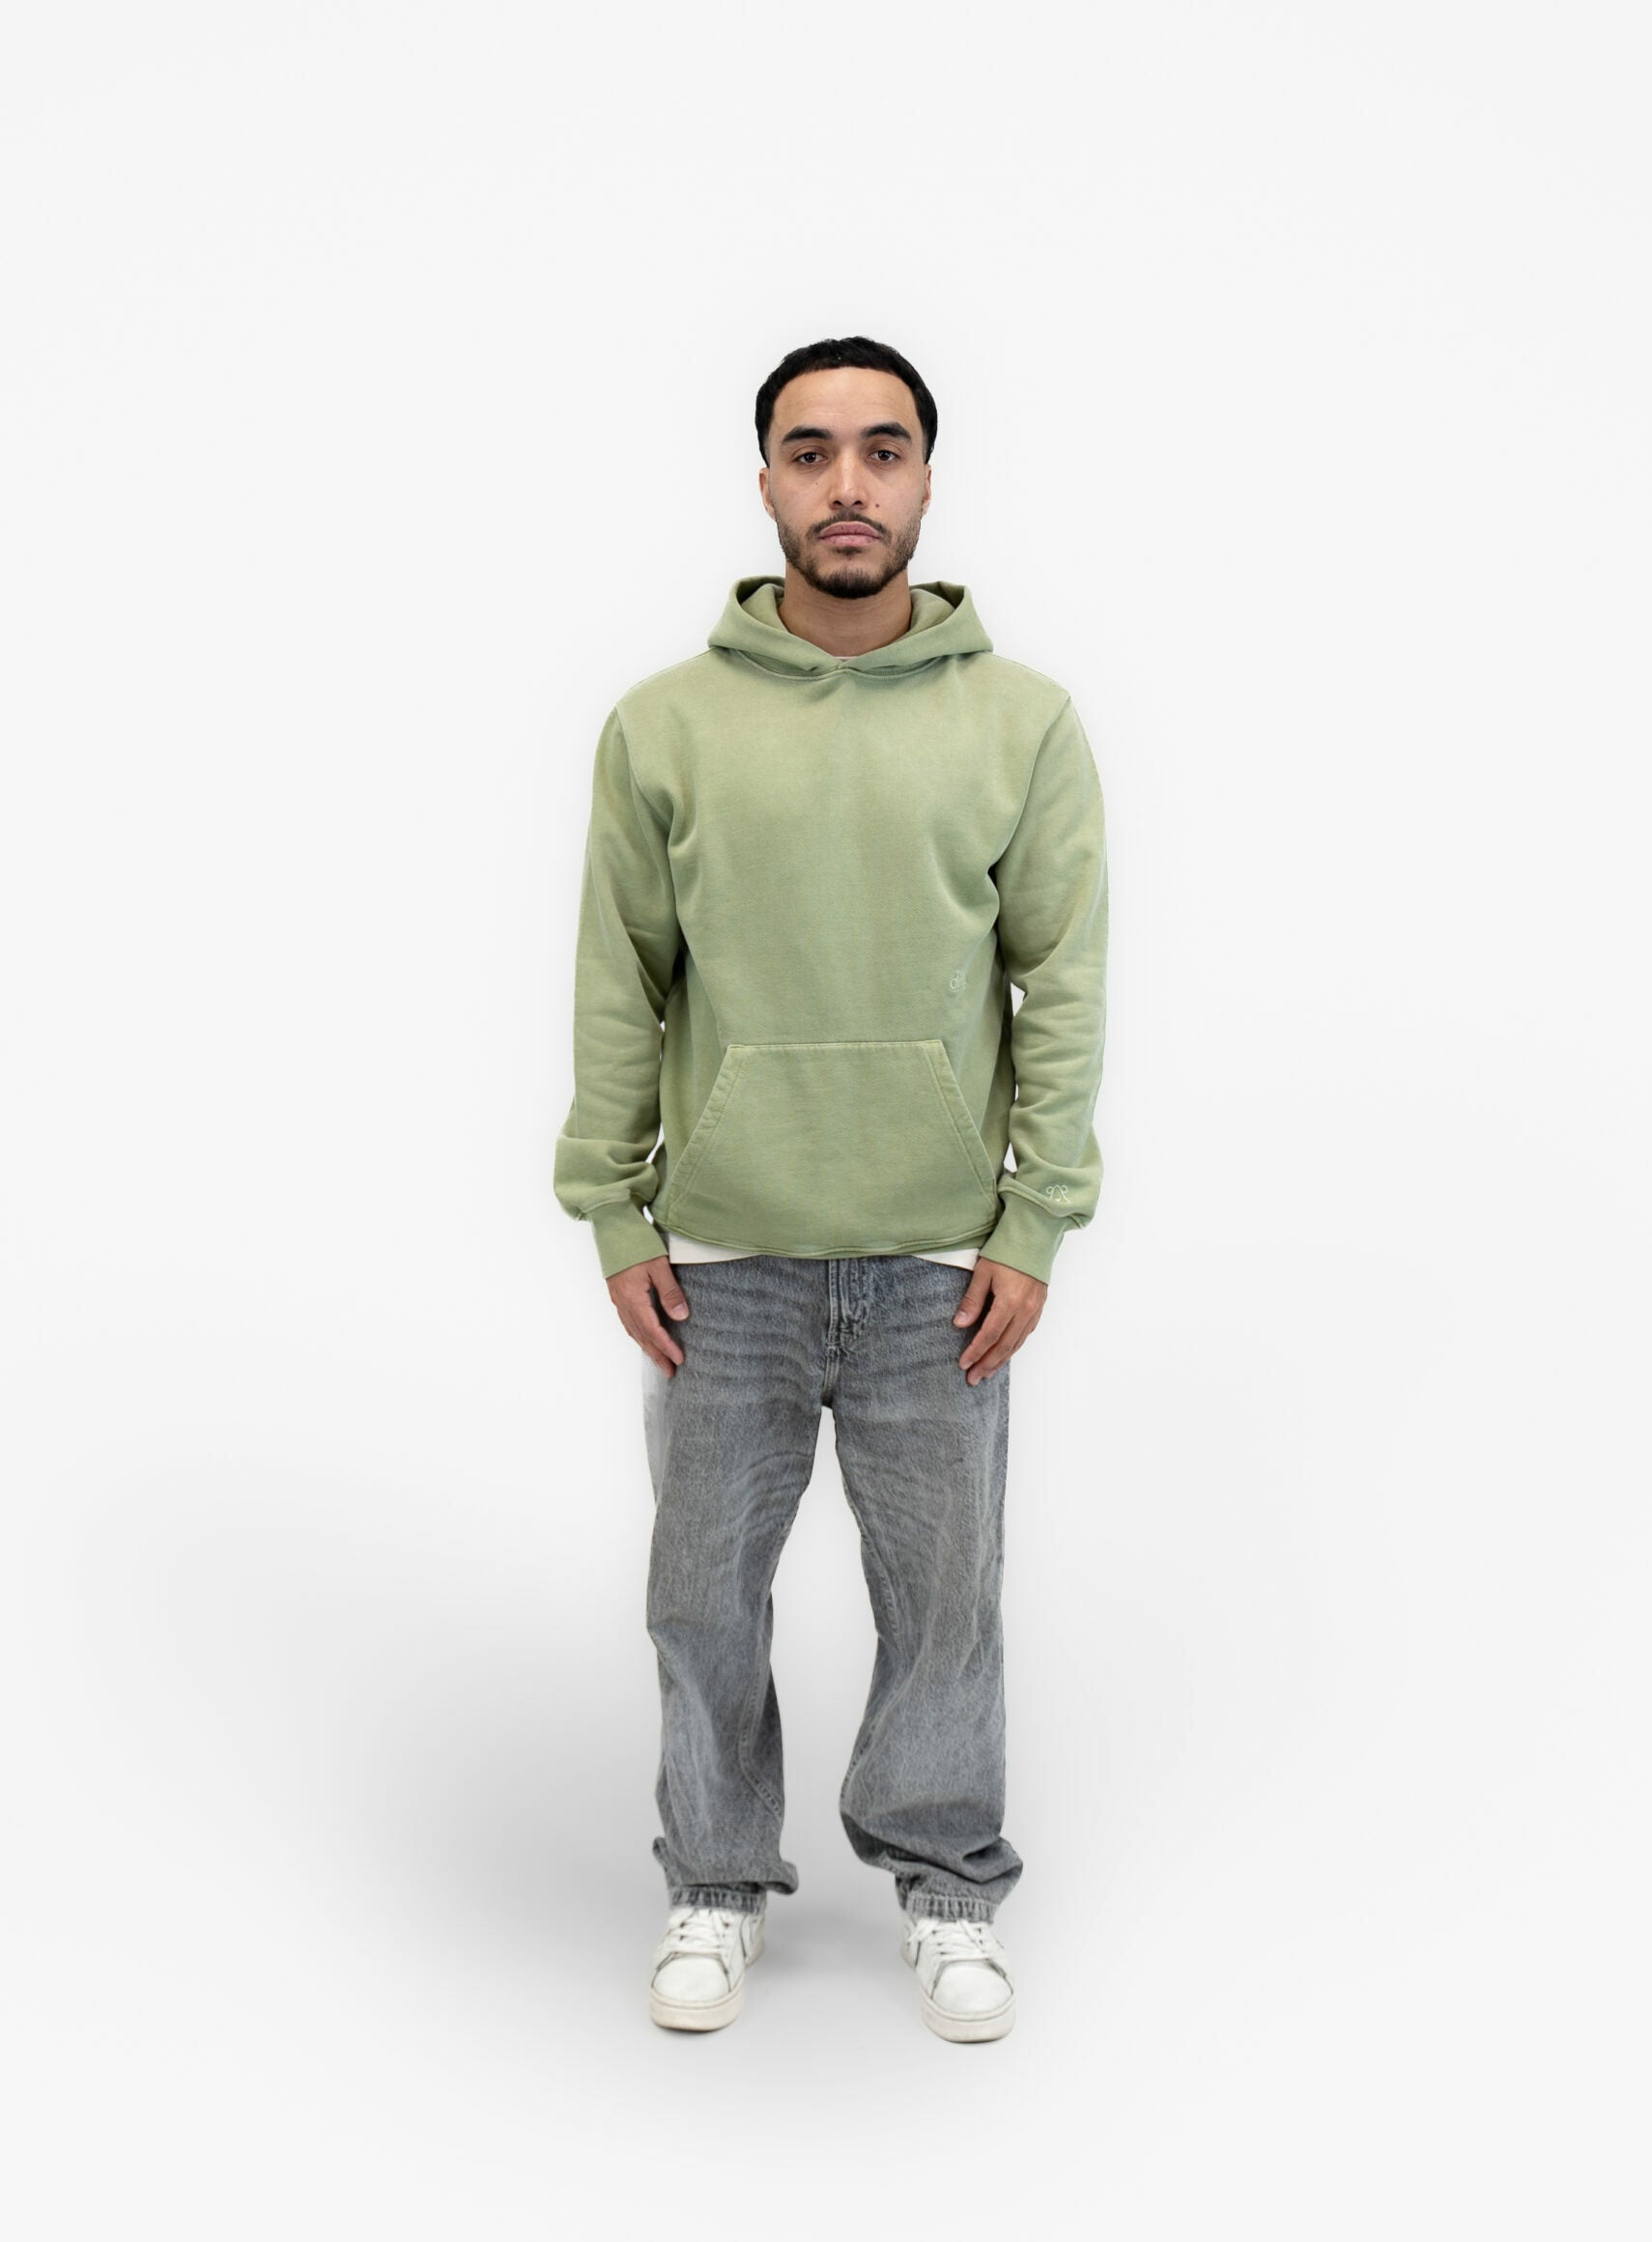 A model wearing the green mineral dyed organic hoodie by French Sustainable Menswear Brand DOXA.